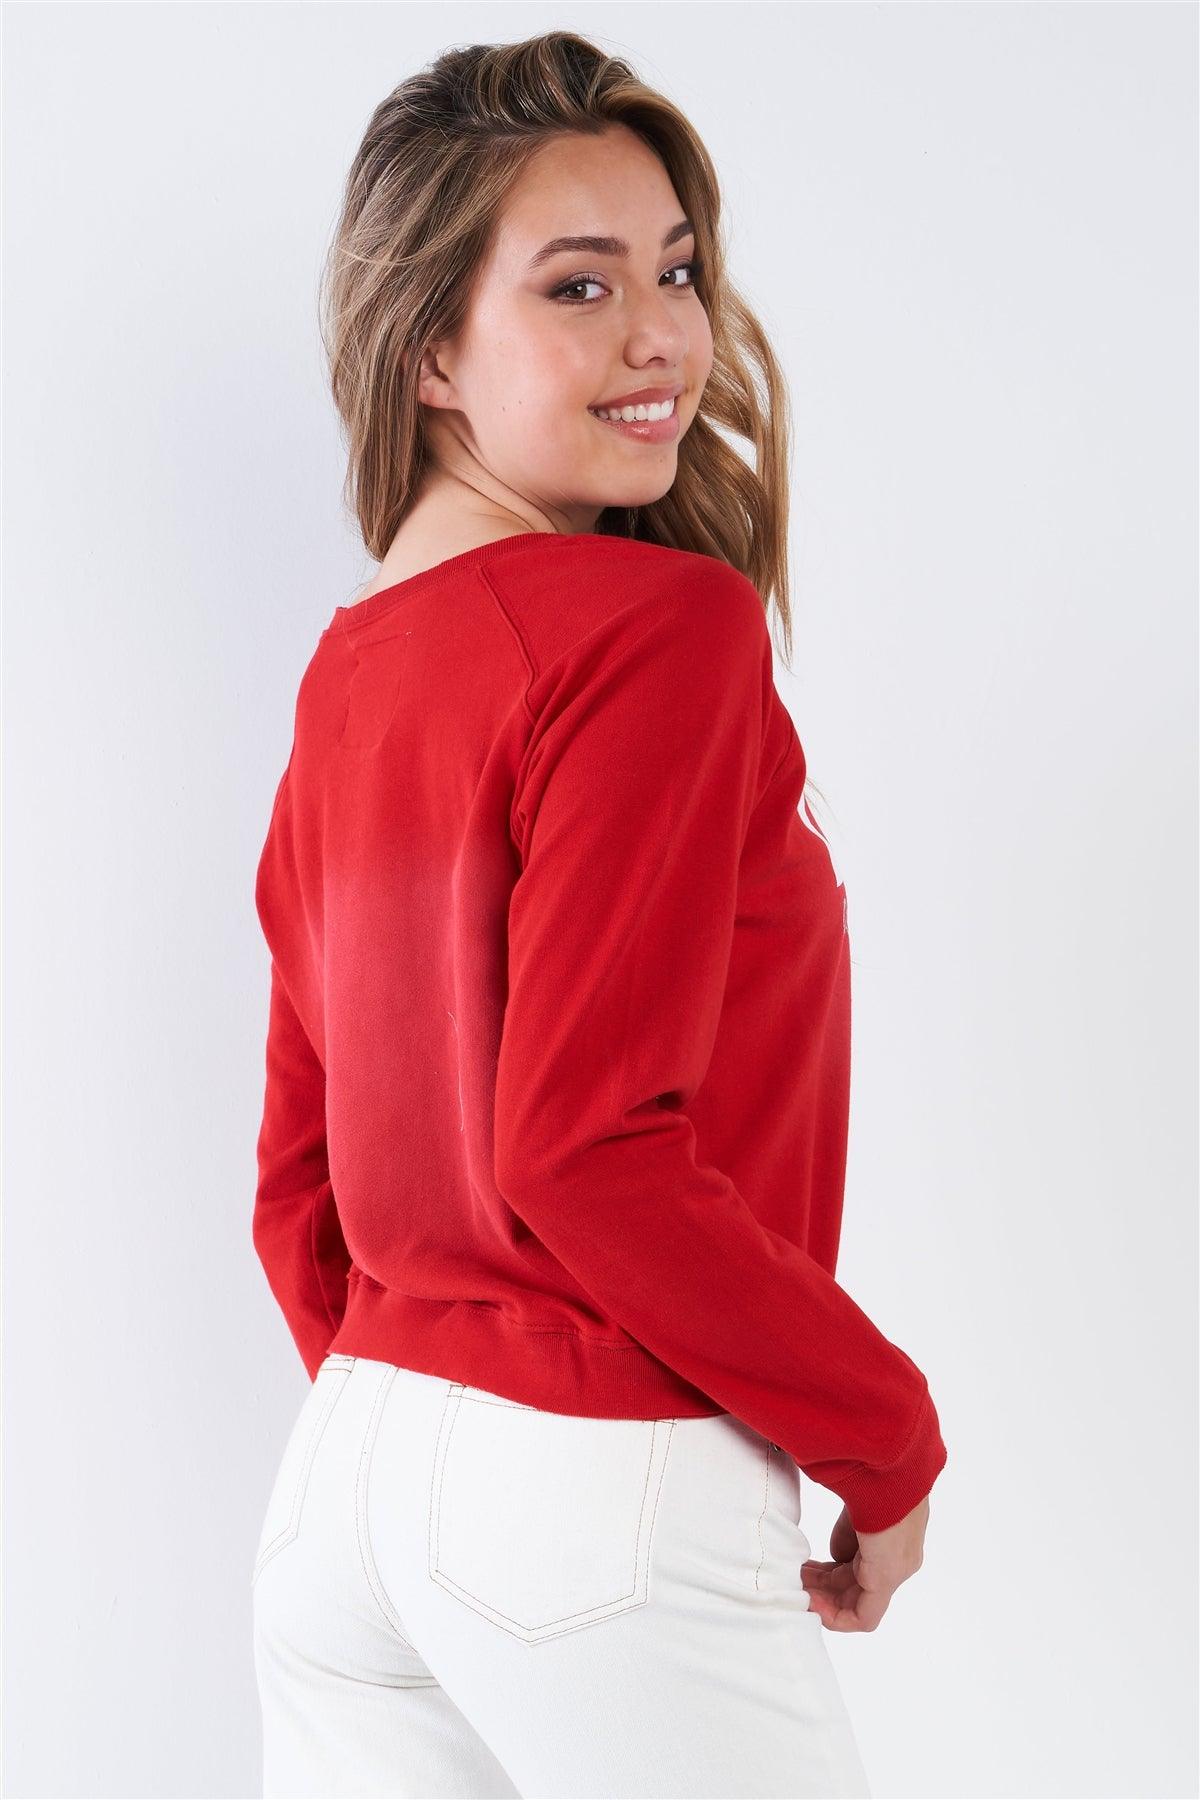 Samba Red "I Am Love, Love Attracts Love" Long Sleeve Crew Neck Top